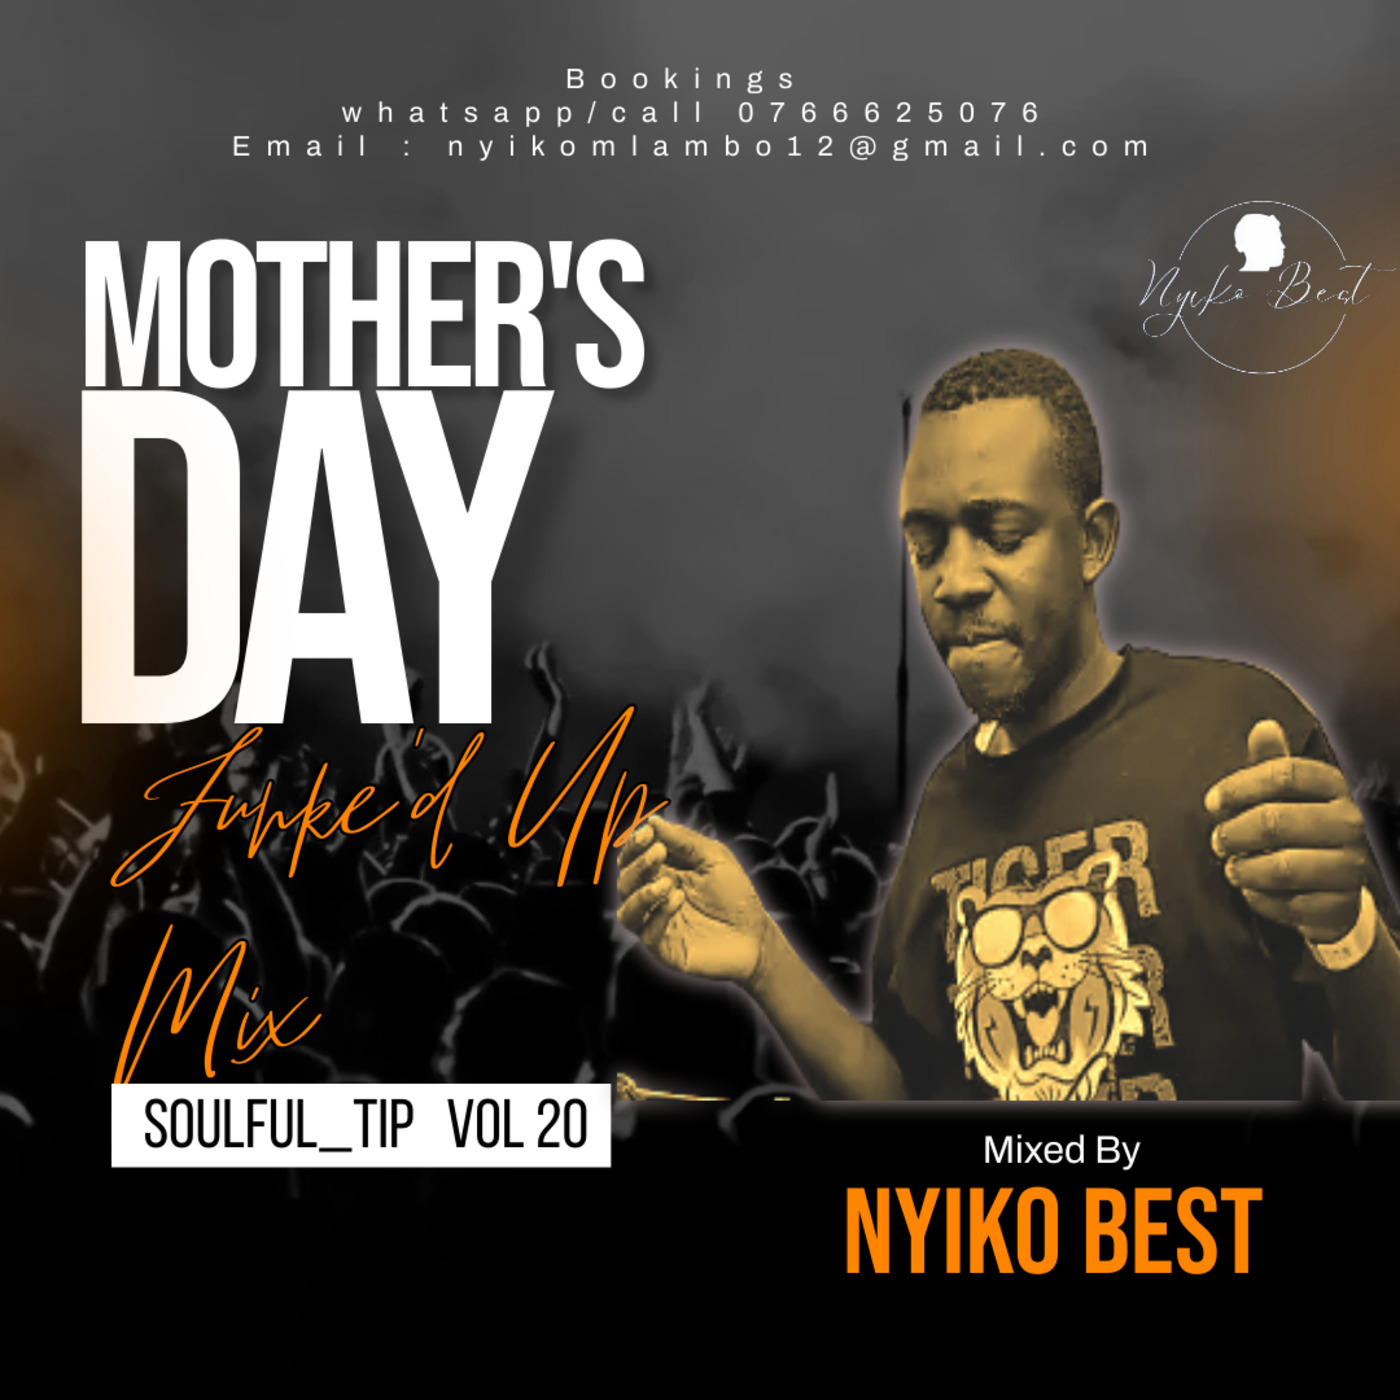 Soulful_Tip Vol 20 Mixed By Nyiko Best (Mothers Day Funked Up Soul Mix) 2023